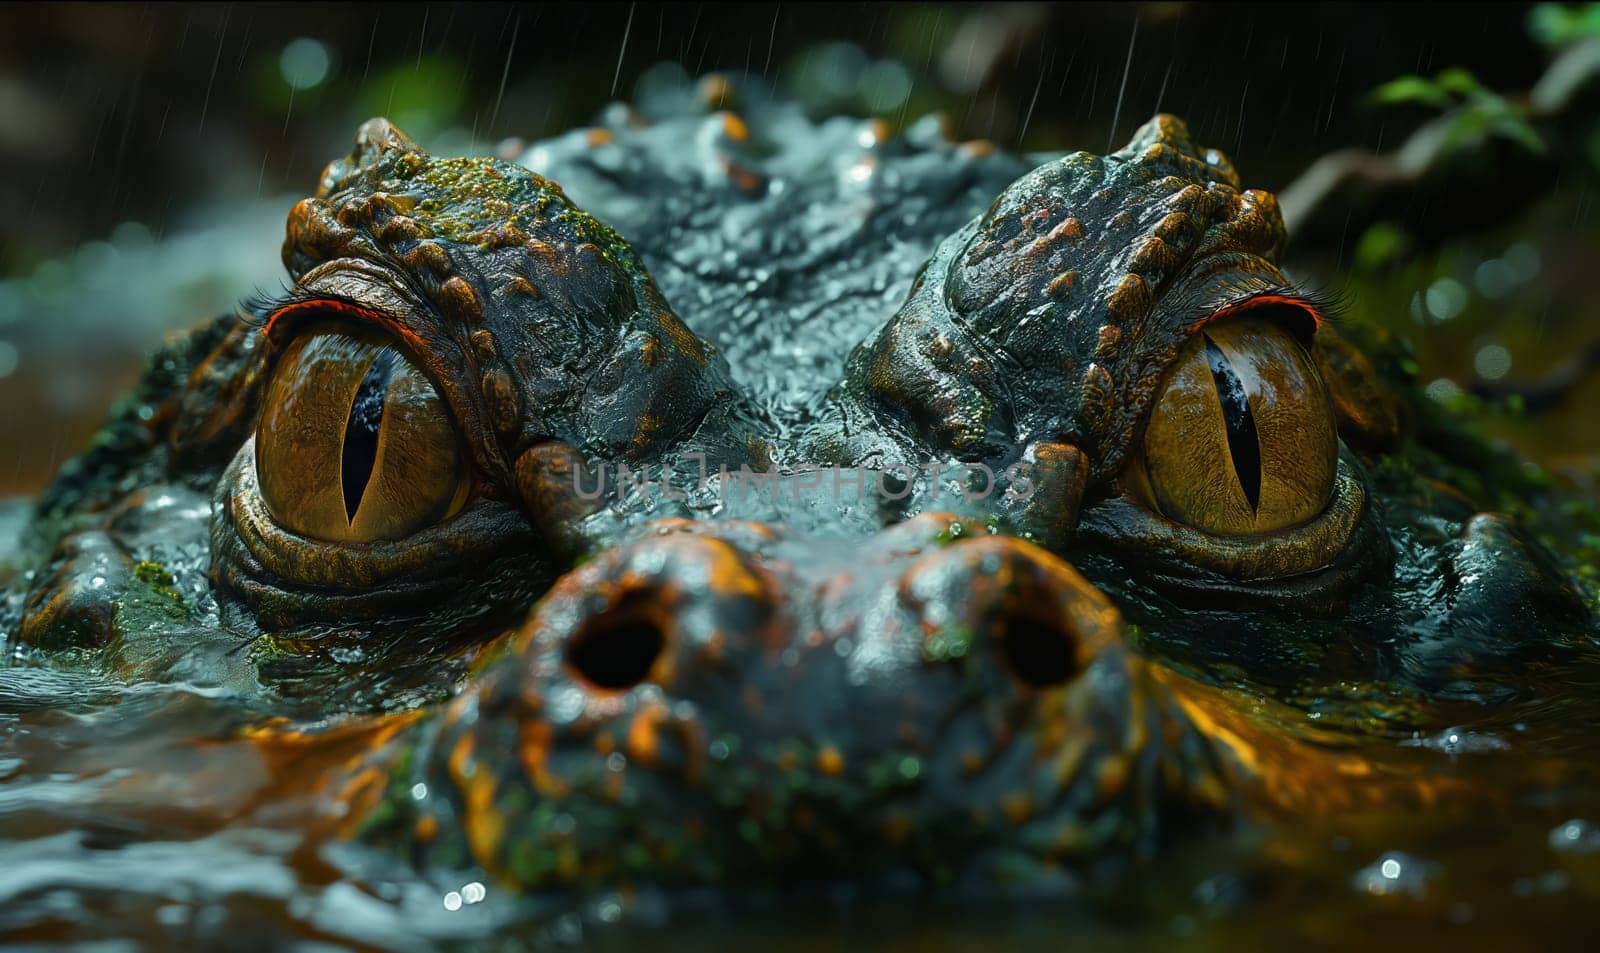 A detailed view of an alligators menacing face partially submerged in water.